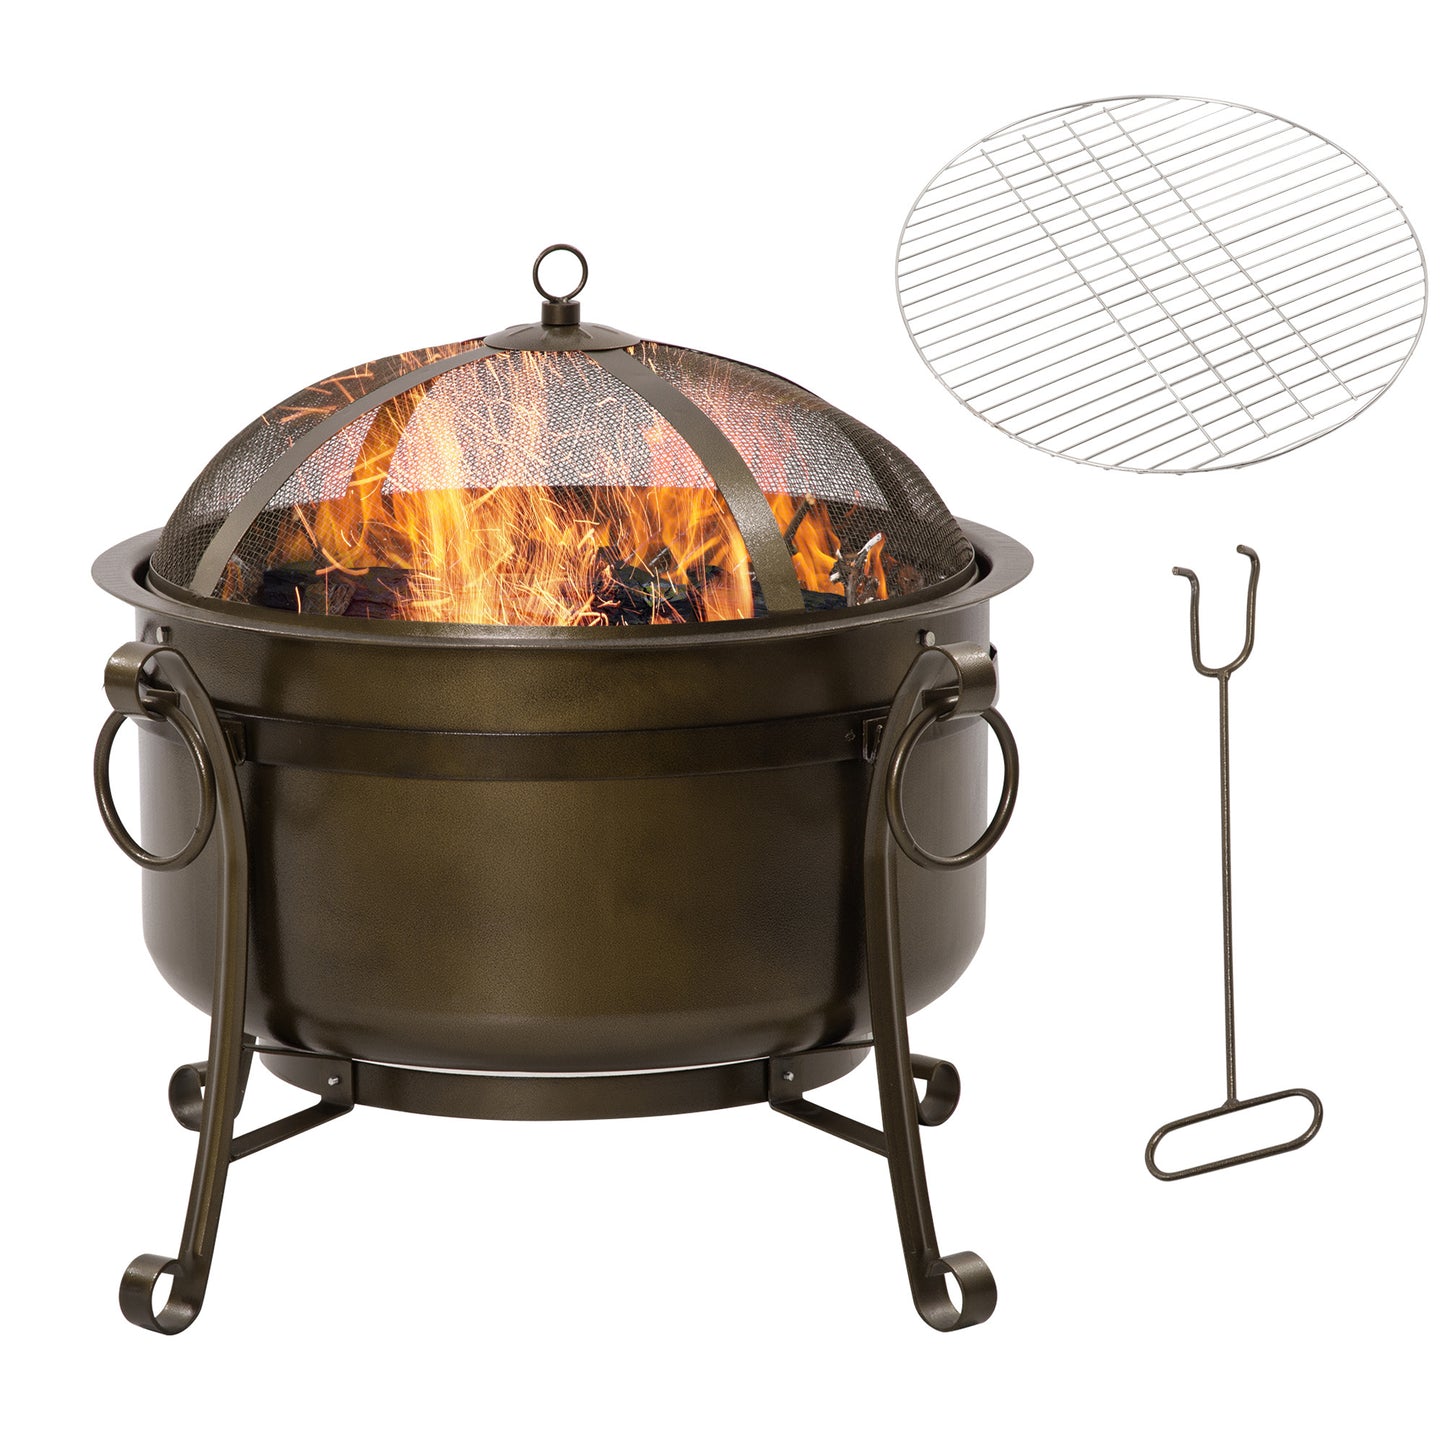 Outsunny 30" Outdoor Fire Pit Grill with Cooking Grate, Poker, Spark Screen Lid, Bronze Colored